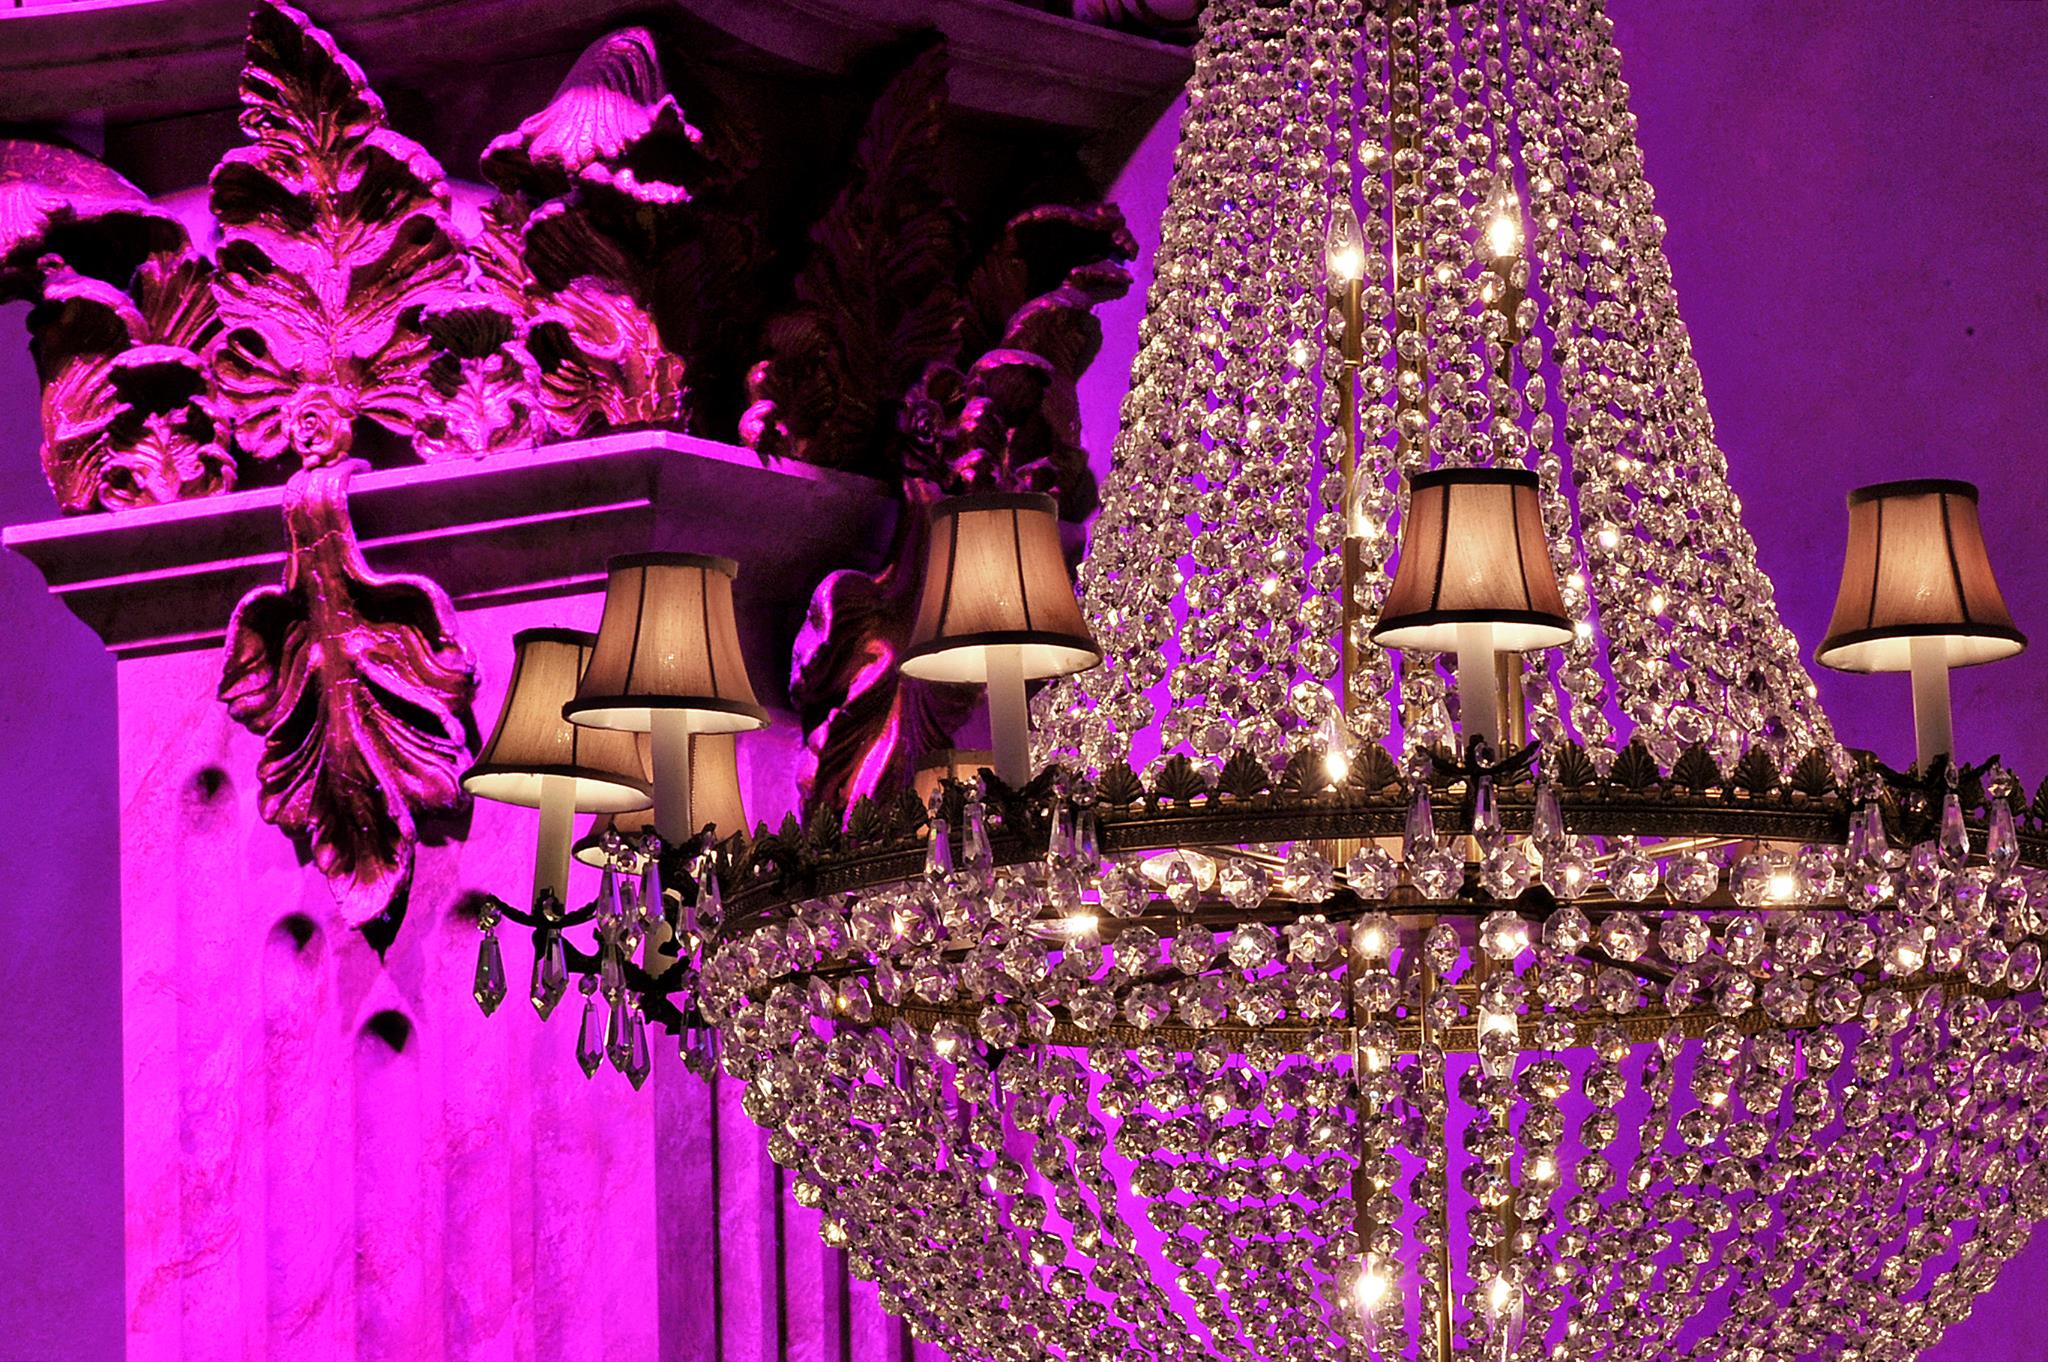 Crystal Chandeliers